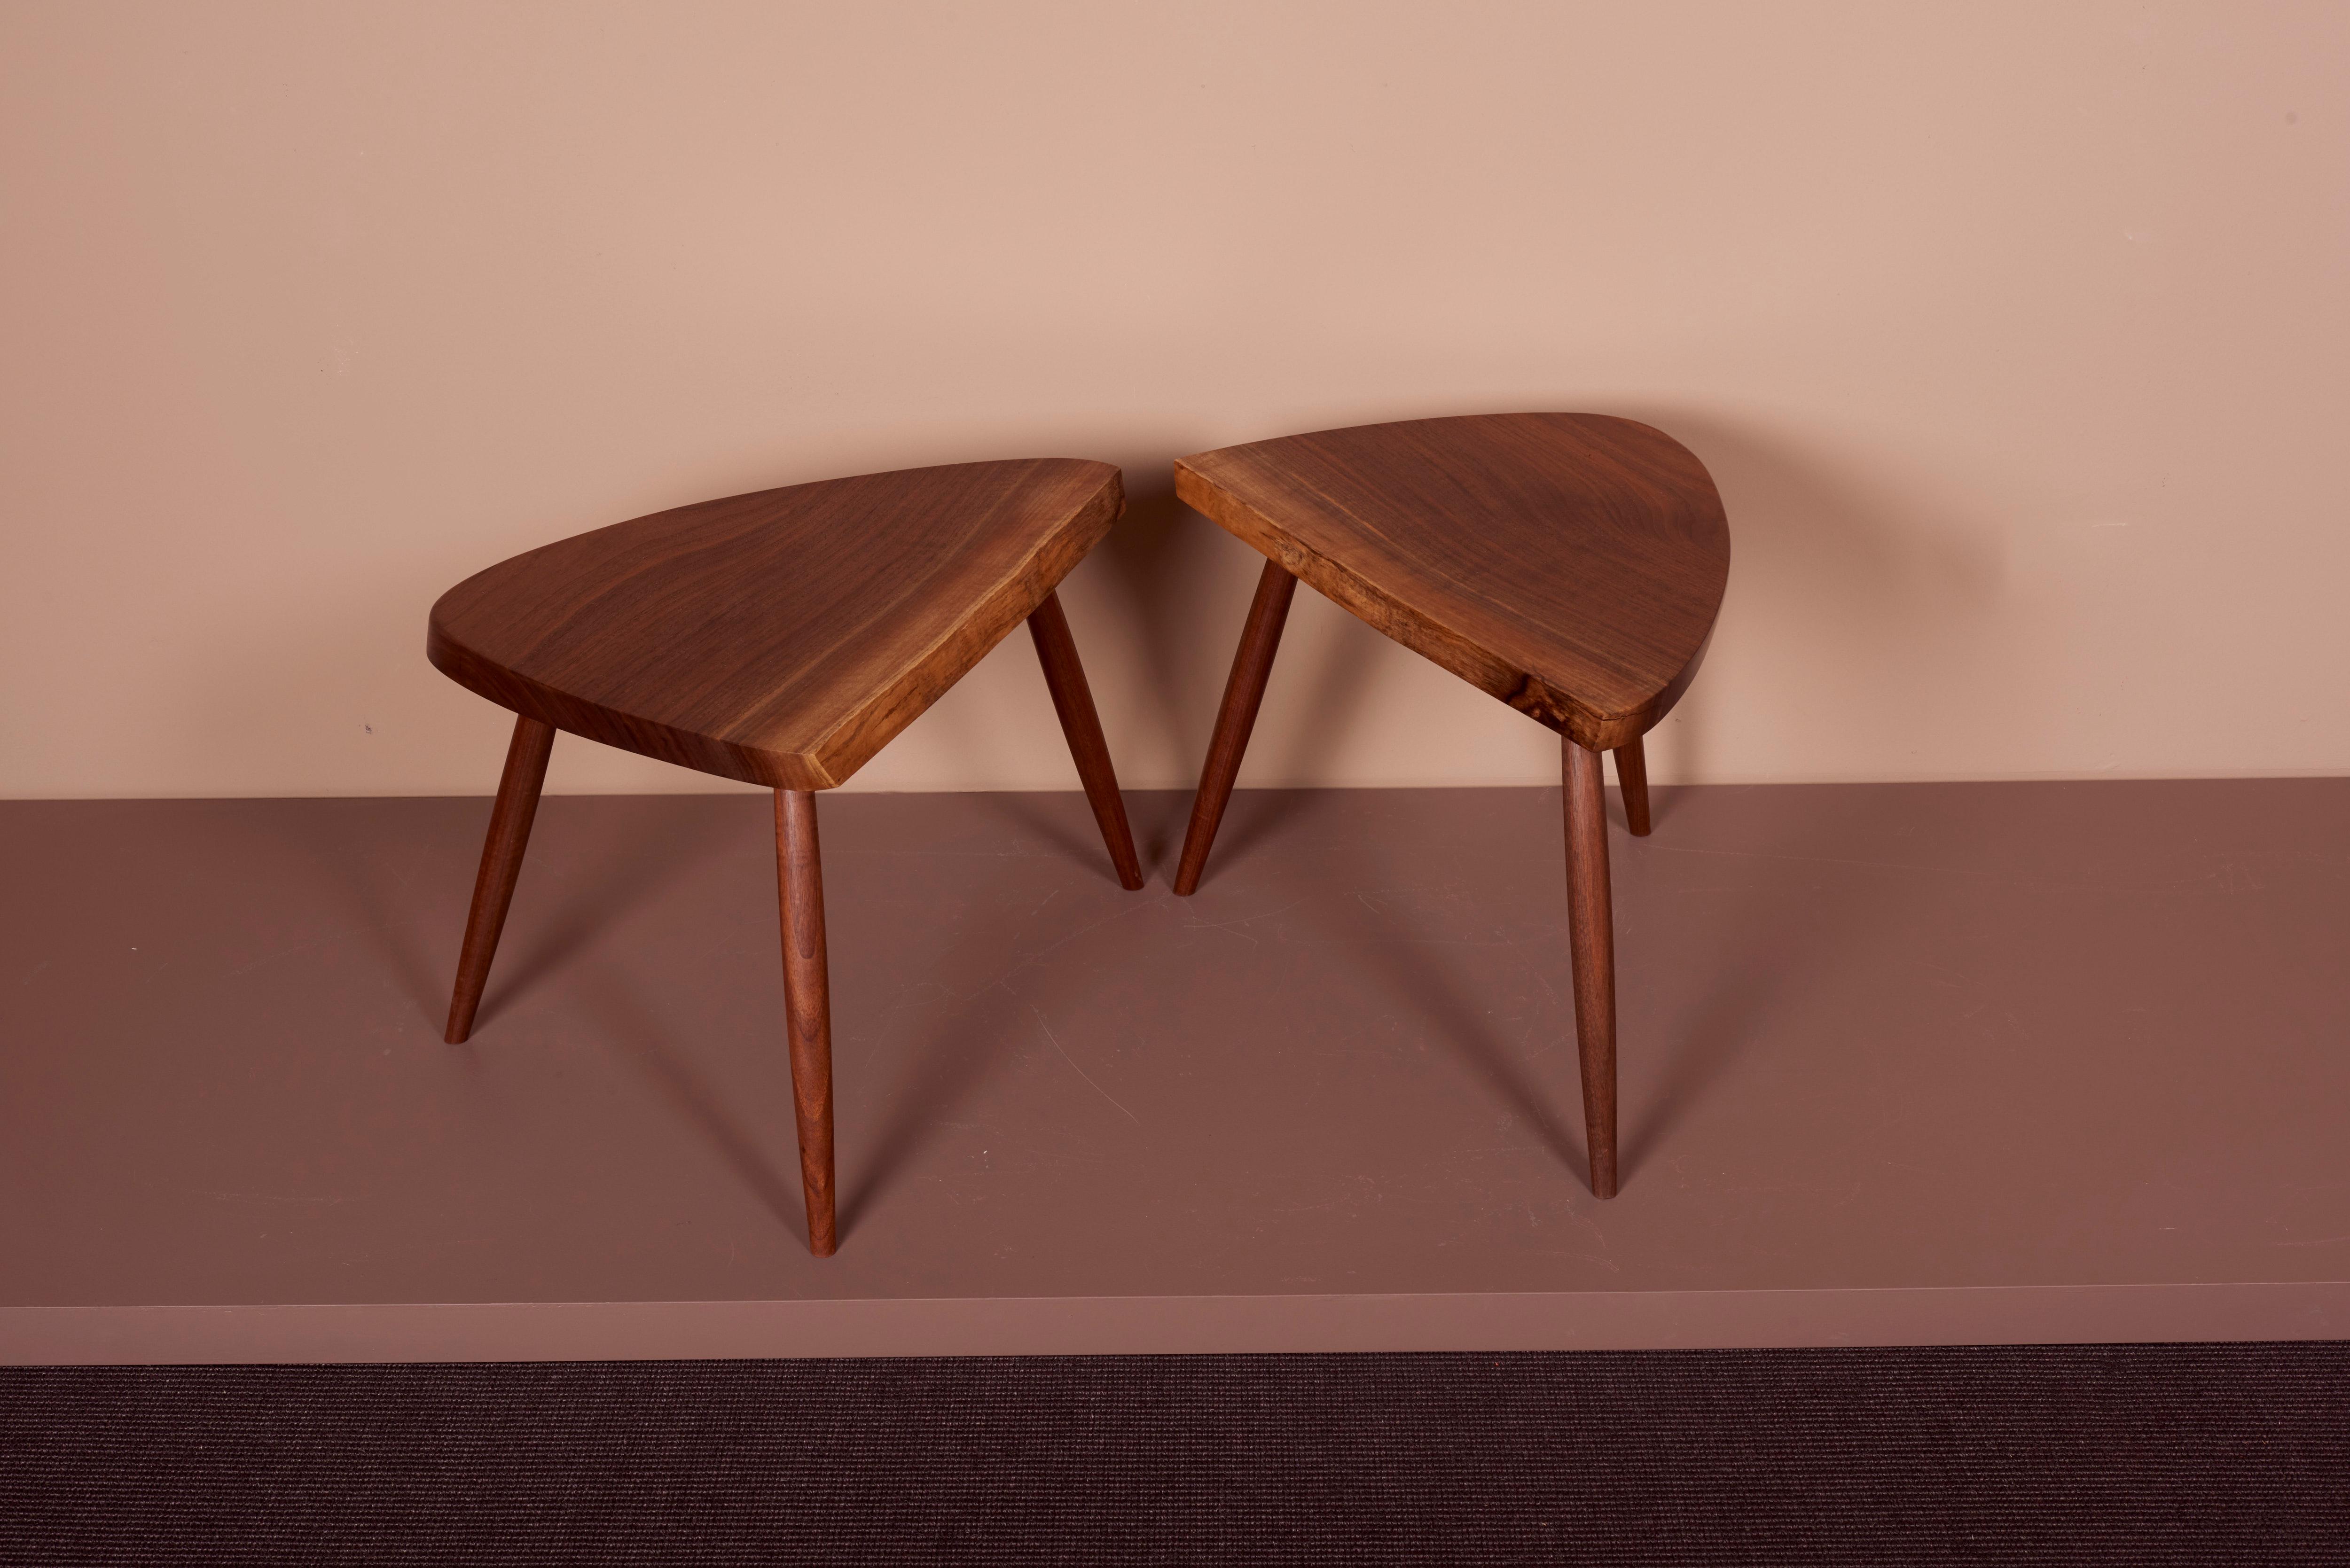 Pair of Mira Nakashima Wepman Side Tables based on a design by George Nakashima For Sale 4